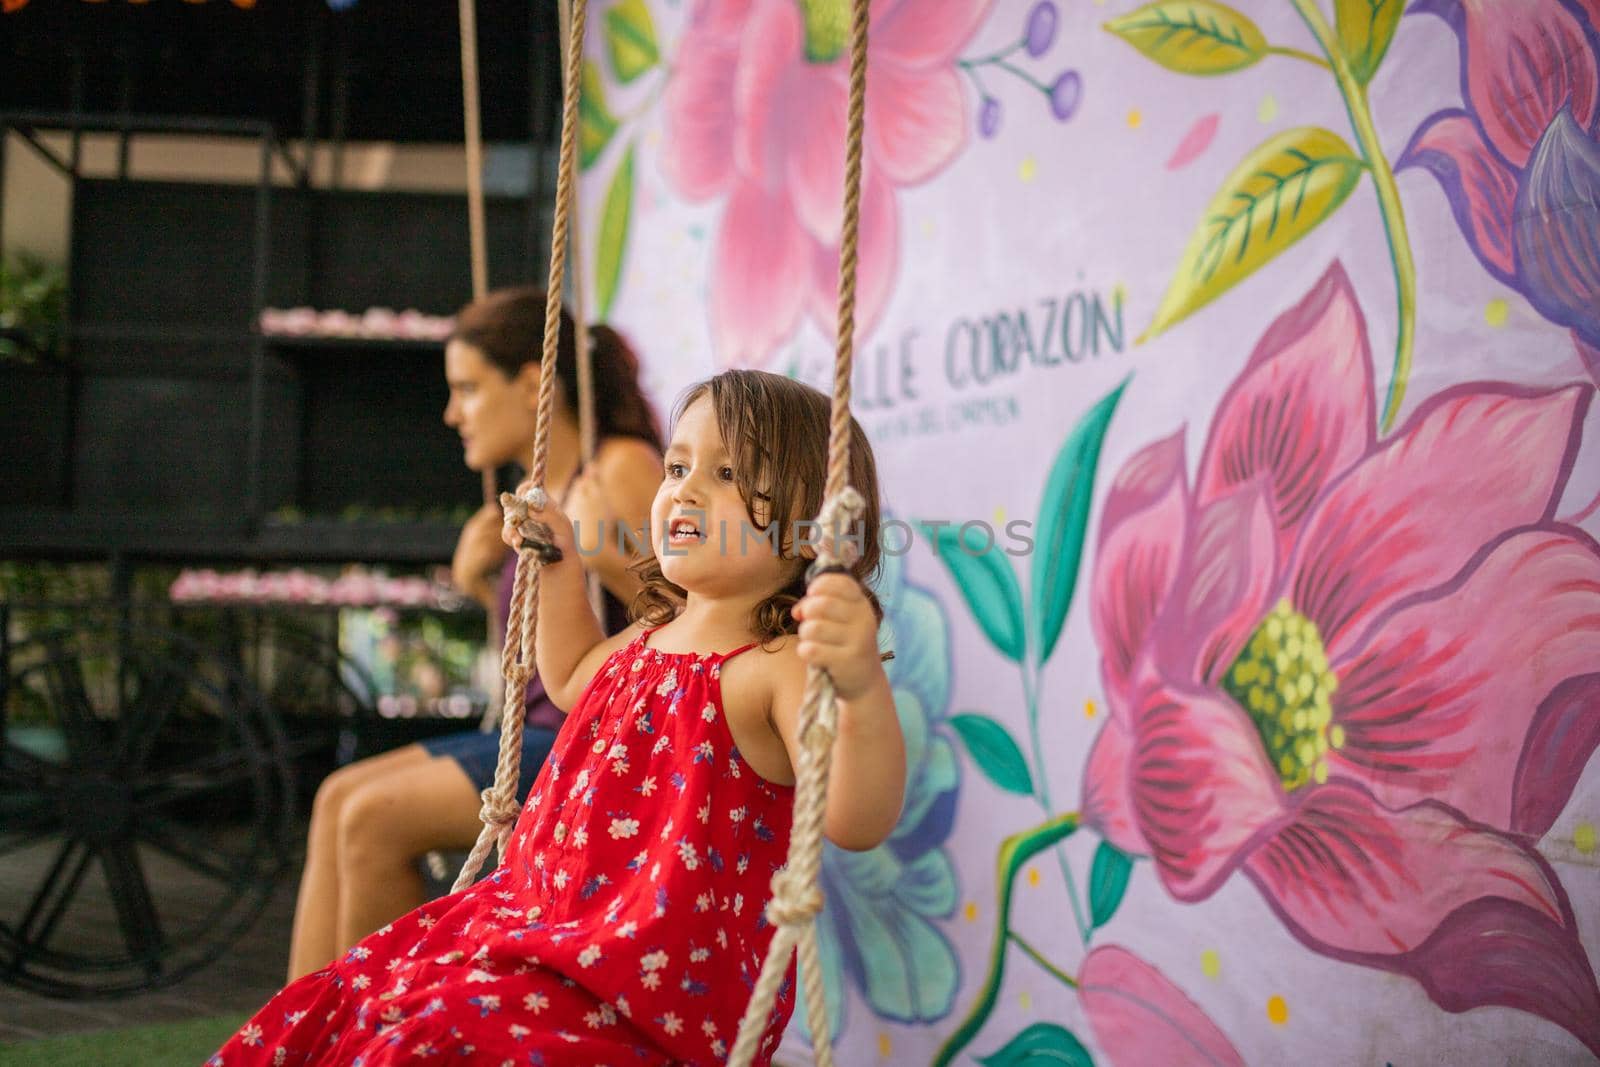 Adorable little girl and woman sitting in rope swings in front of wall with painted flowers and the word heart. Cute young child wearing red dress and having fun on swing. Daughter-mother fun day